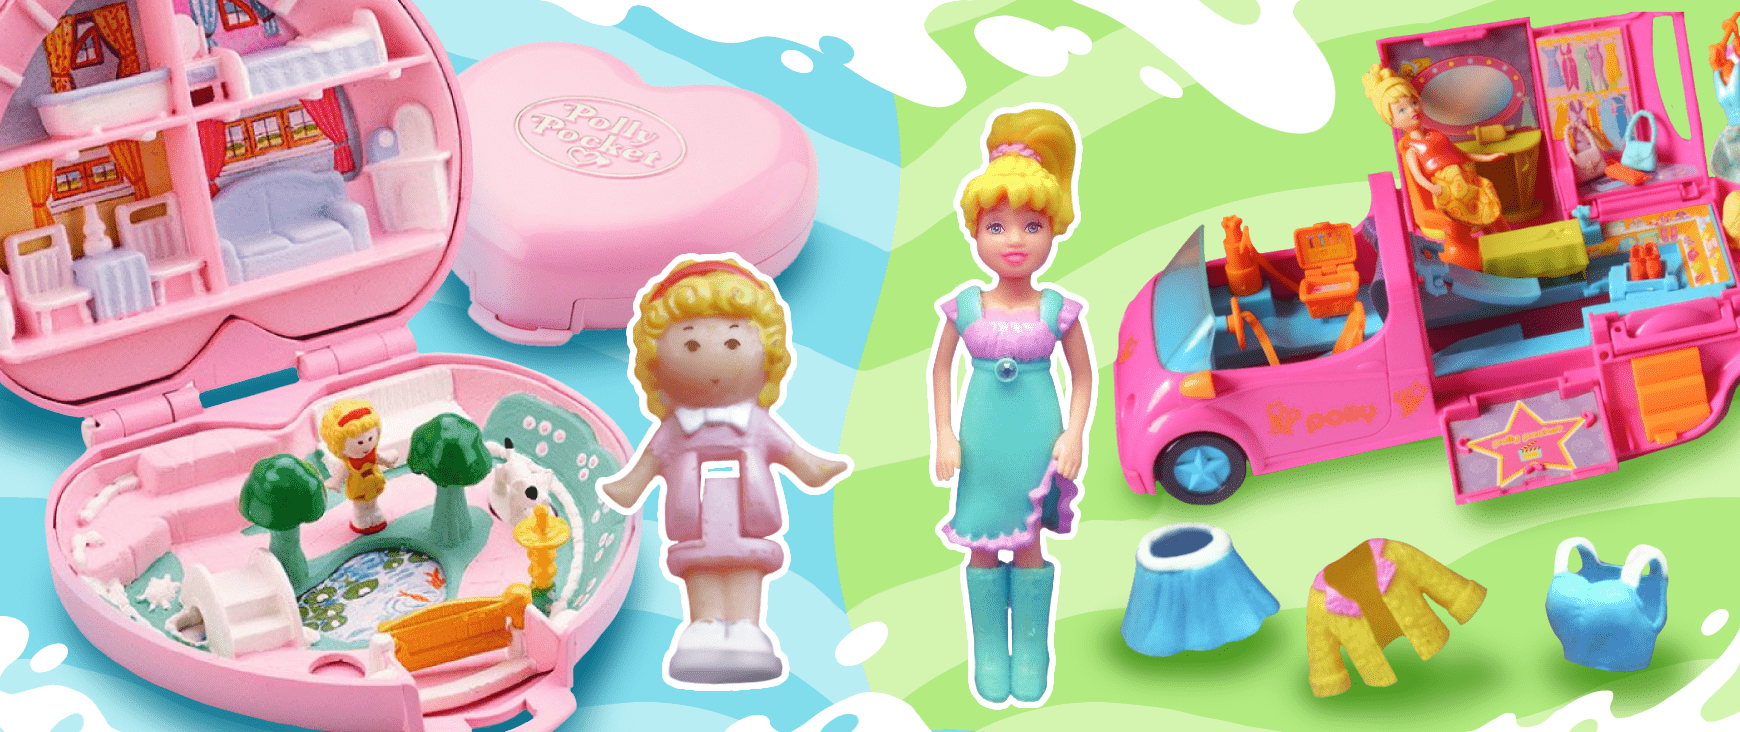 90s Polly Pocket: Exploring the Popularity of Miniature Playsets